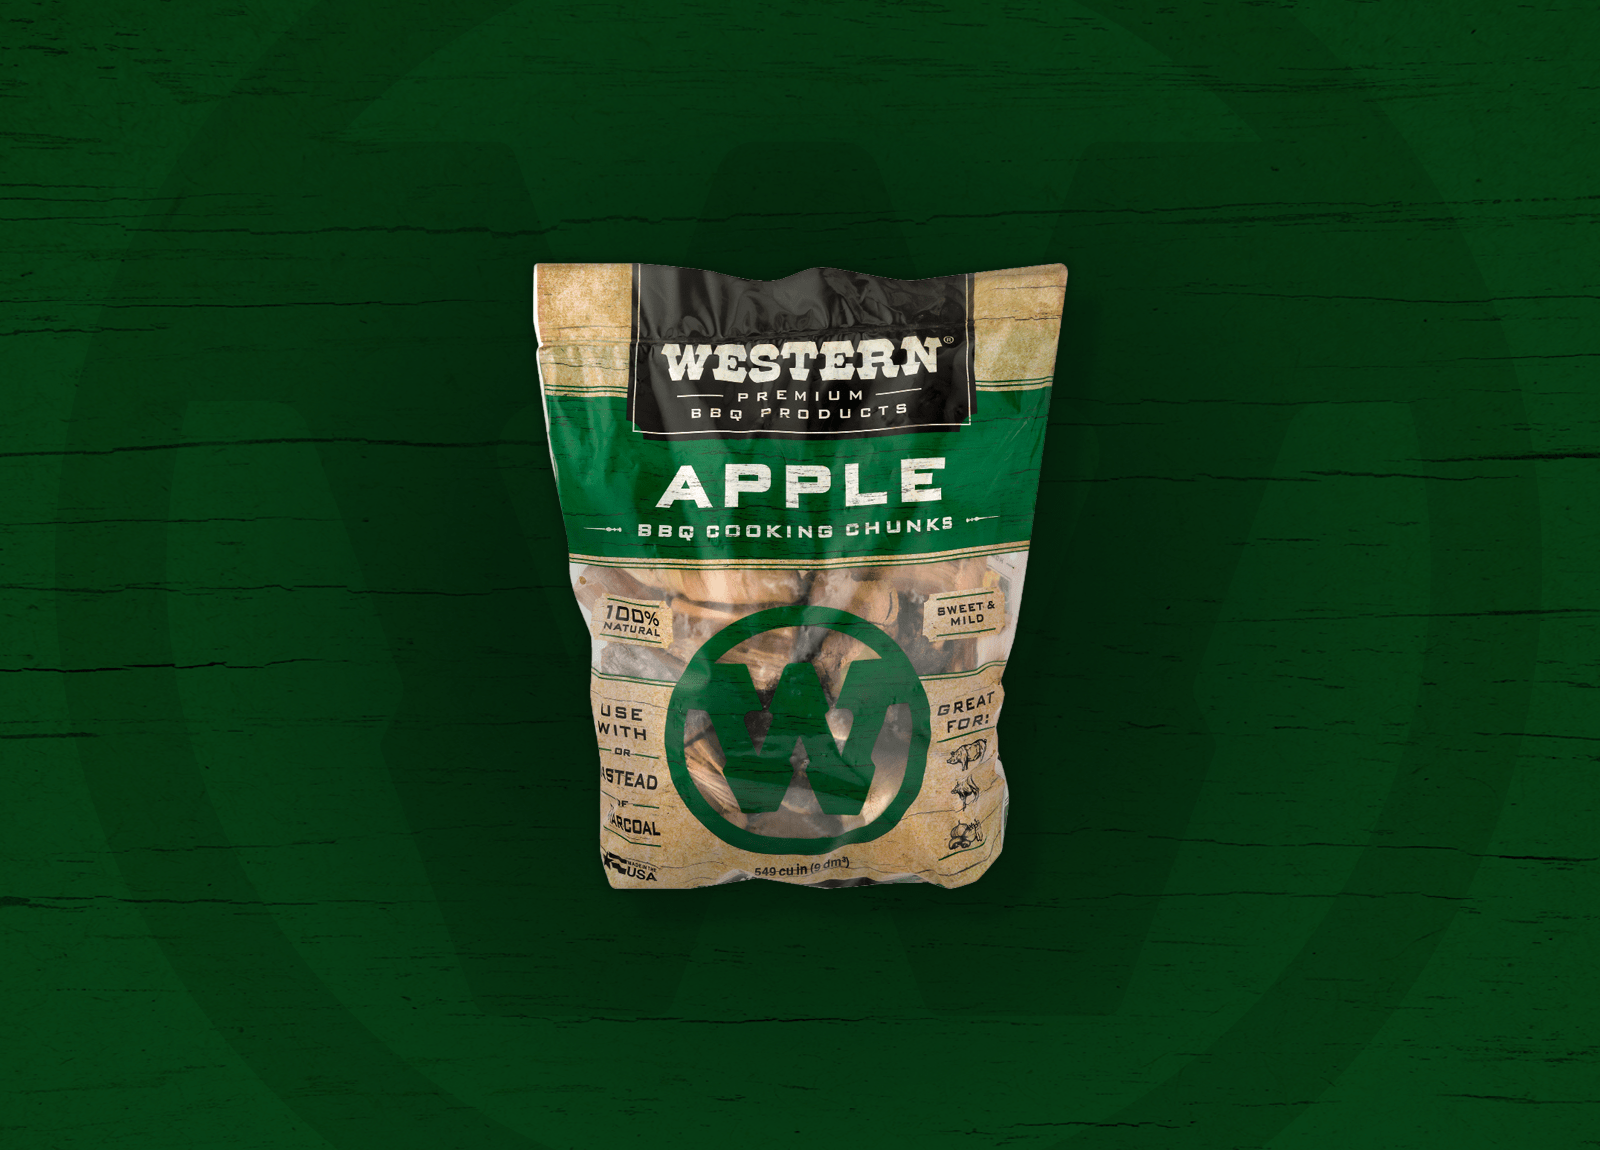 a bag of Western apple smoking chunks on a green background